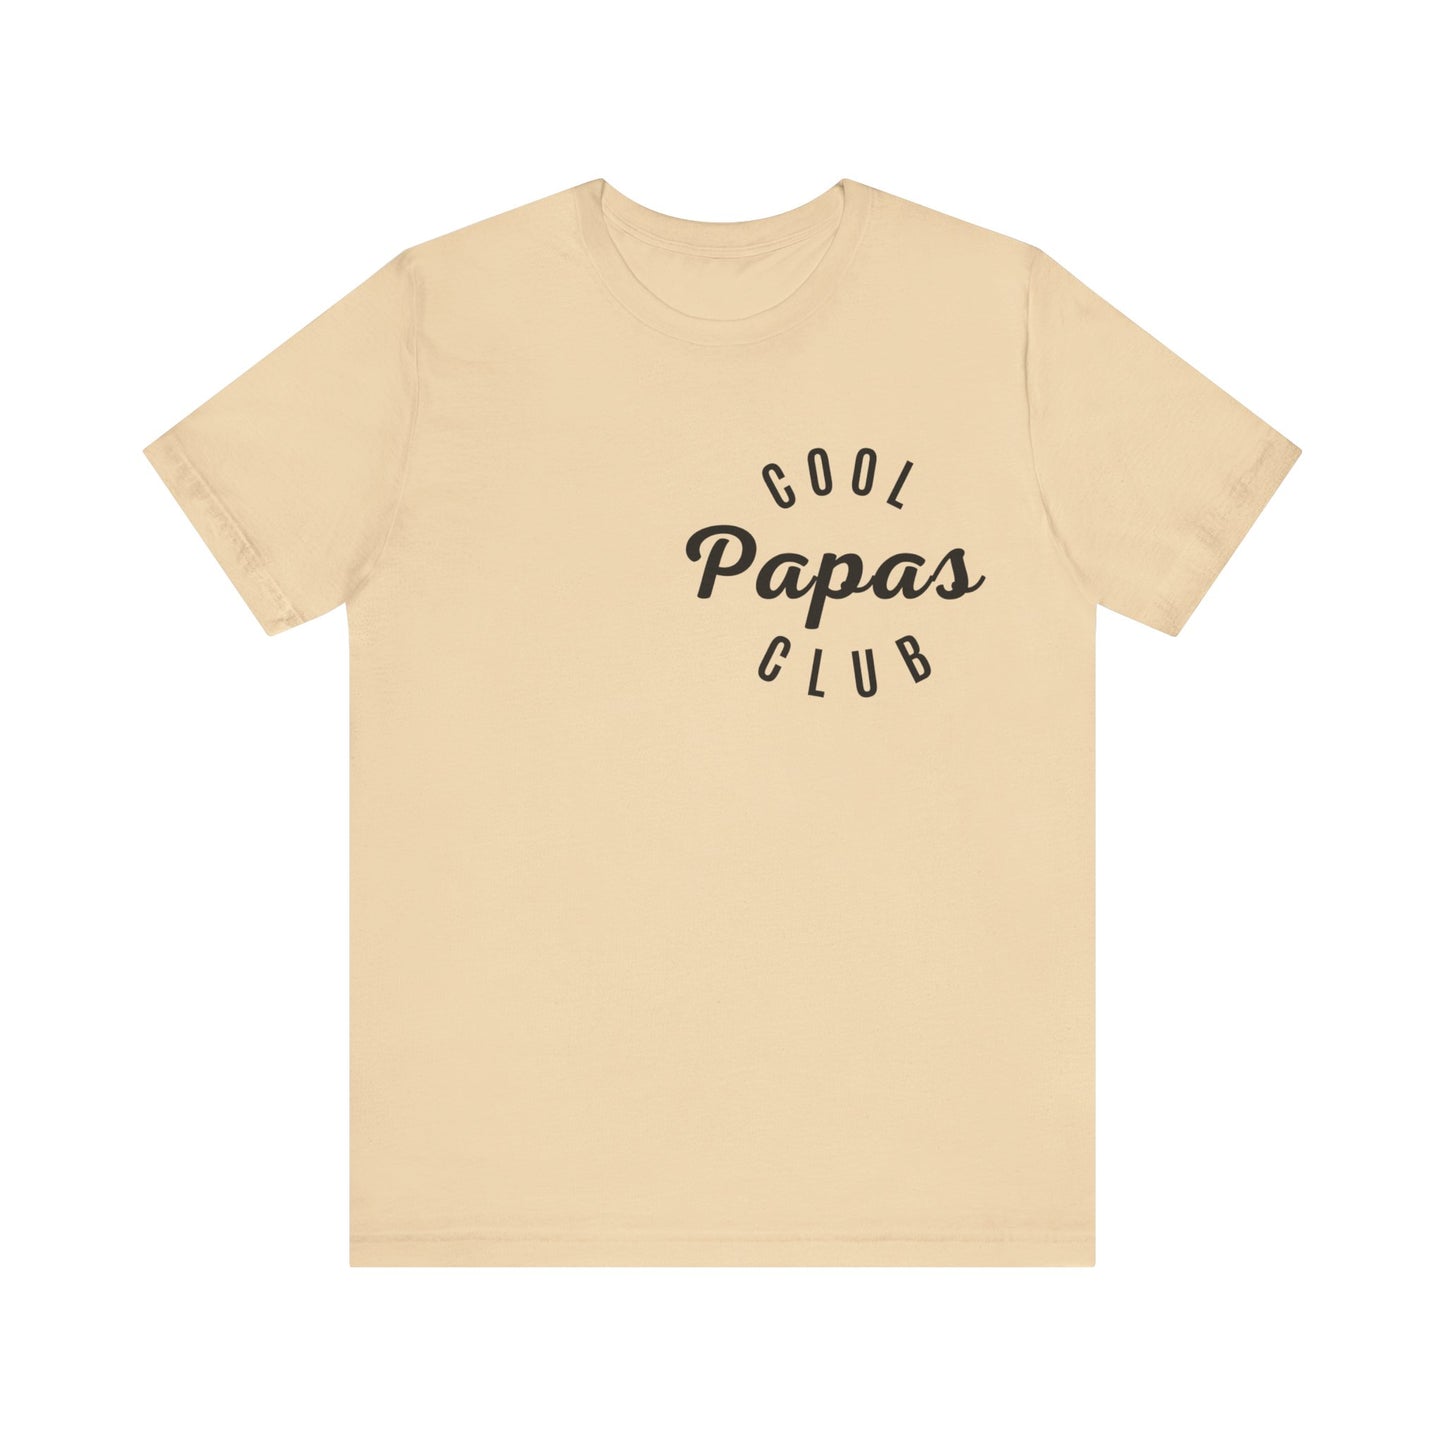 Cool Papas Club Shirt, Pregnancy Announcement TShirt for Dad , Cool Dad T-Shirt for New Dad, Funny Gift for Dad to Be, T1064